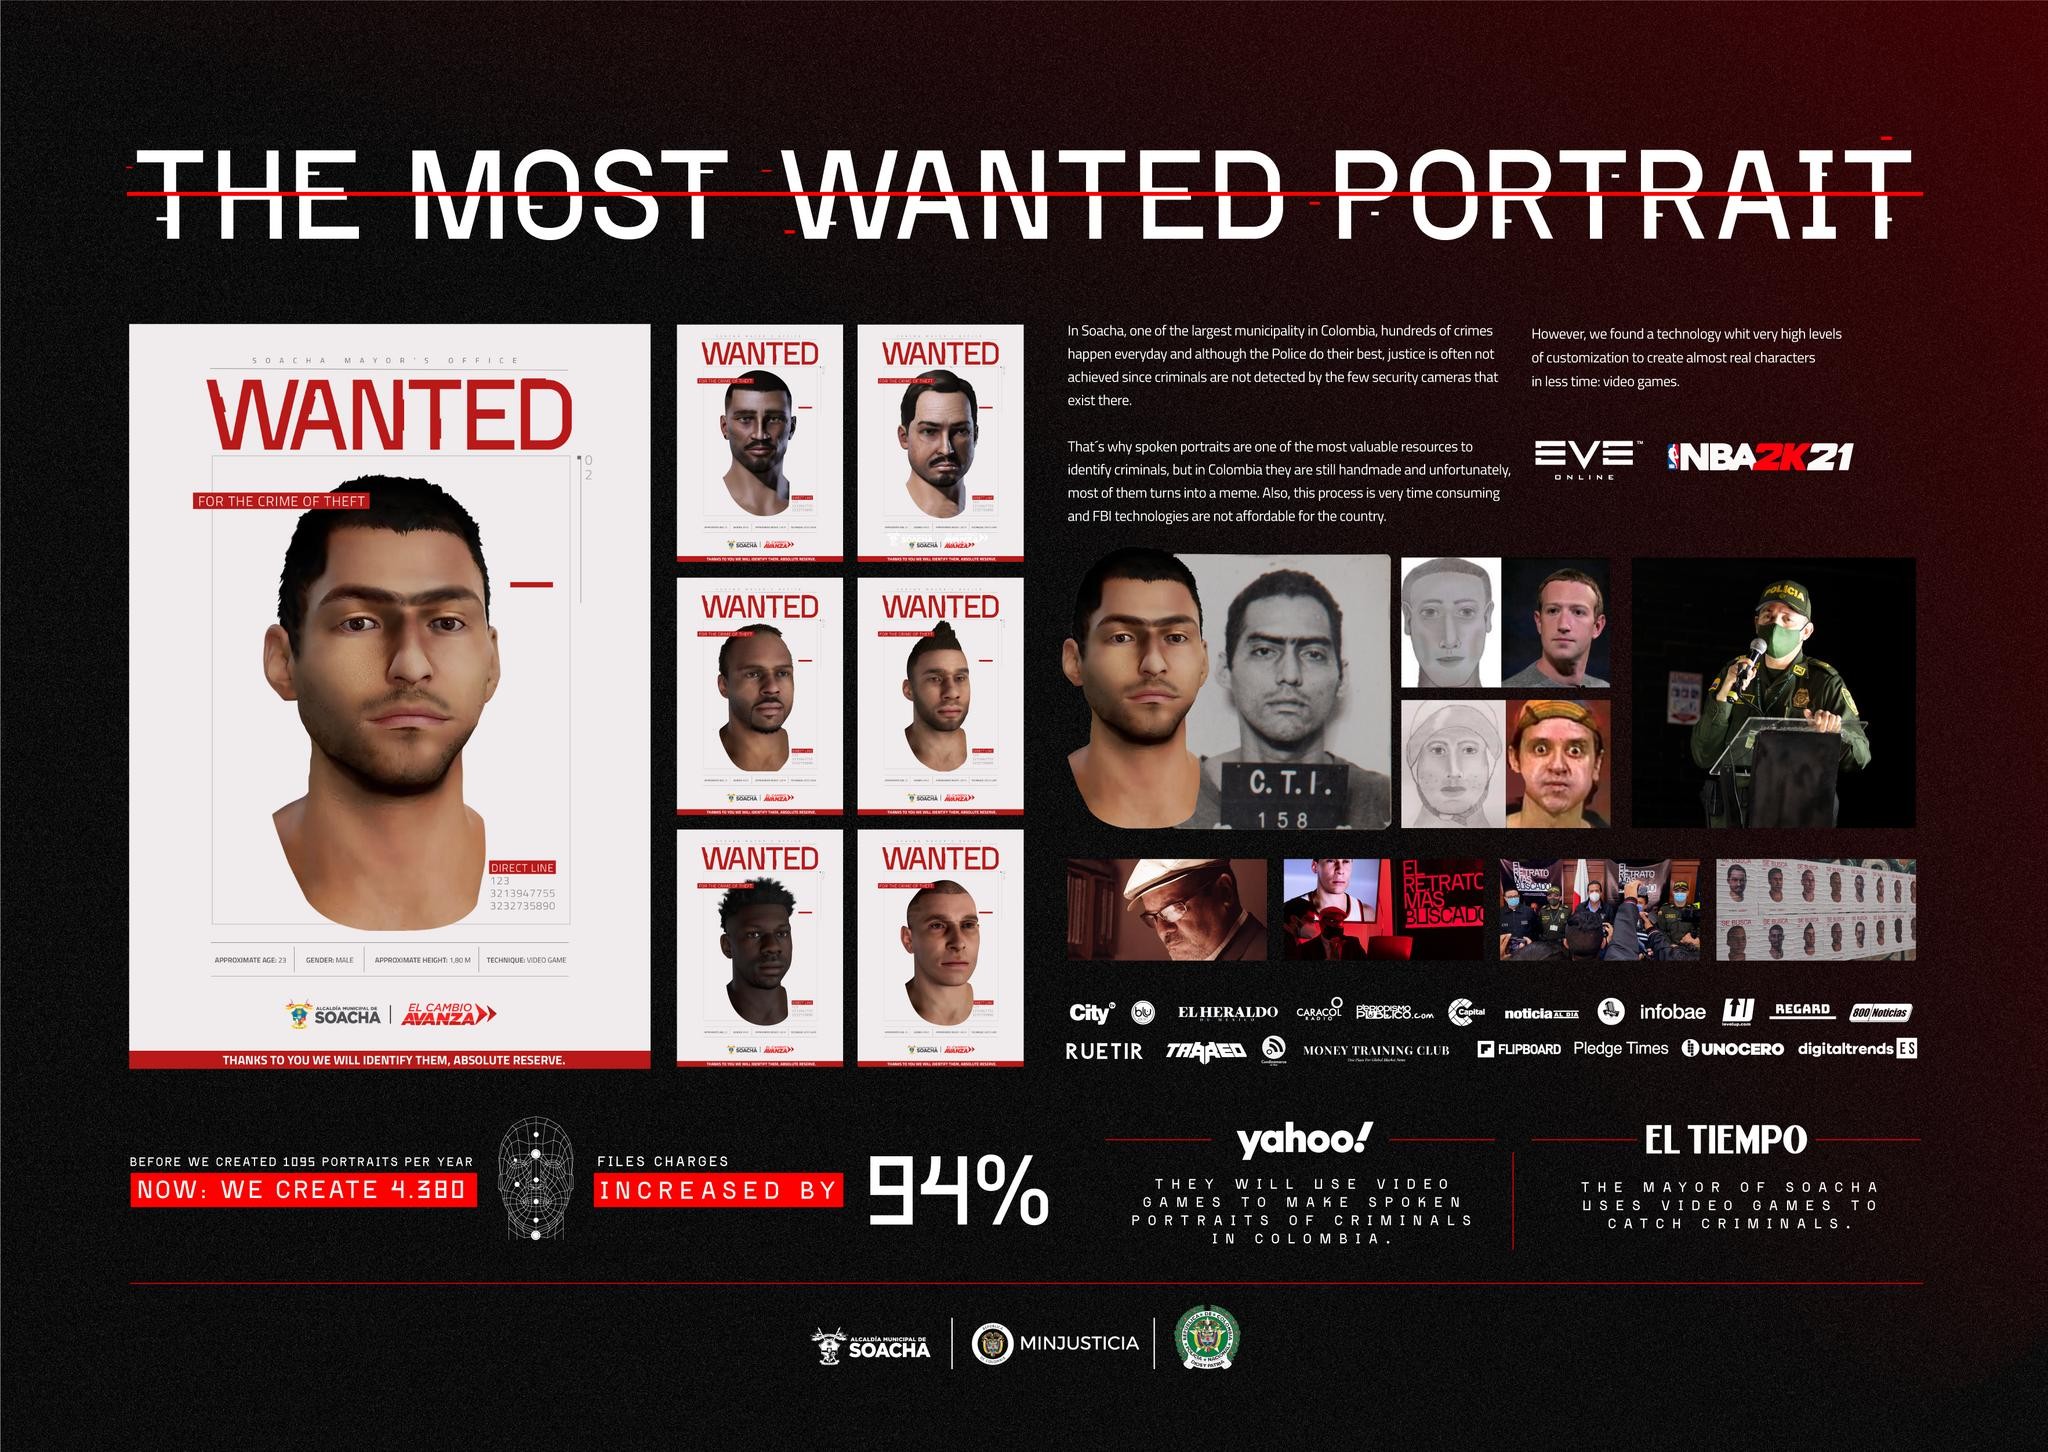 THE MOST WANTED PORTRAIT